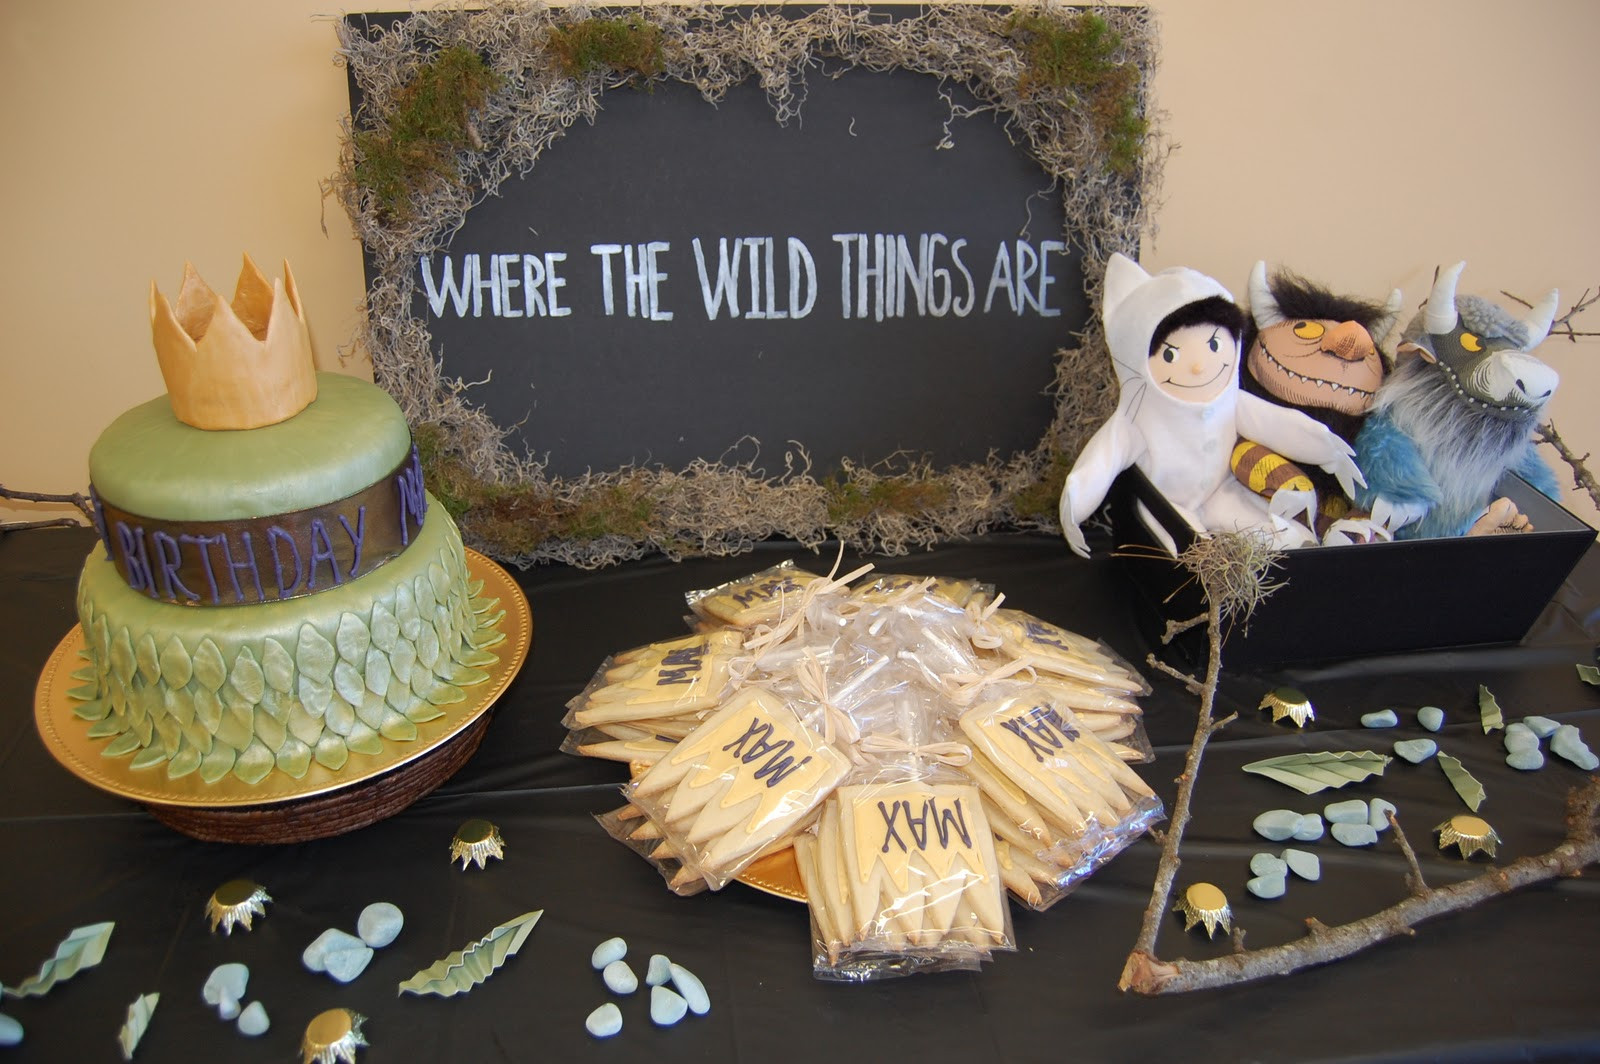 Where The Wild Things Are Birthday Party Supplies
 Places To Have Birthday Parties For Toddlers In San